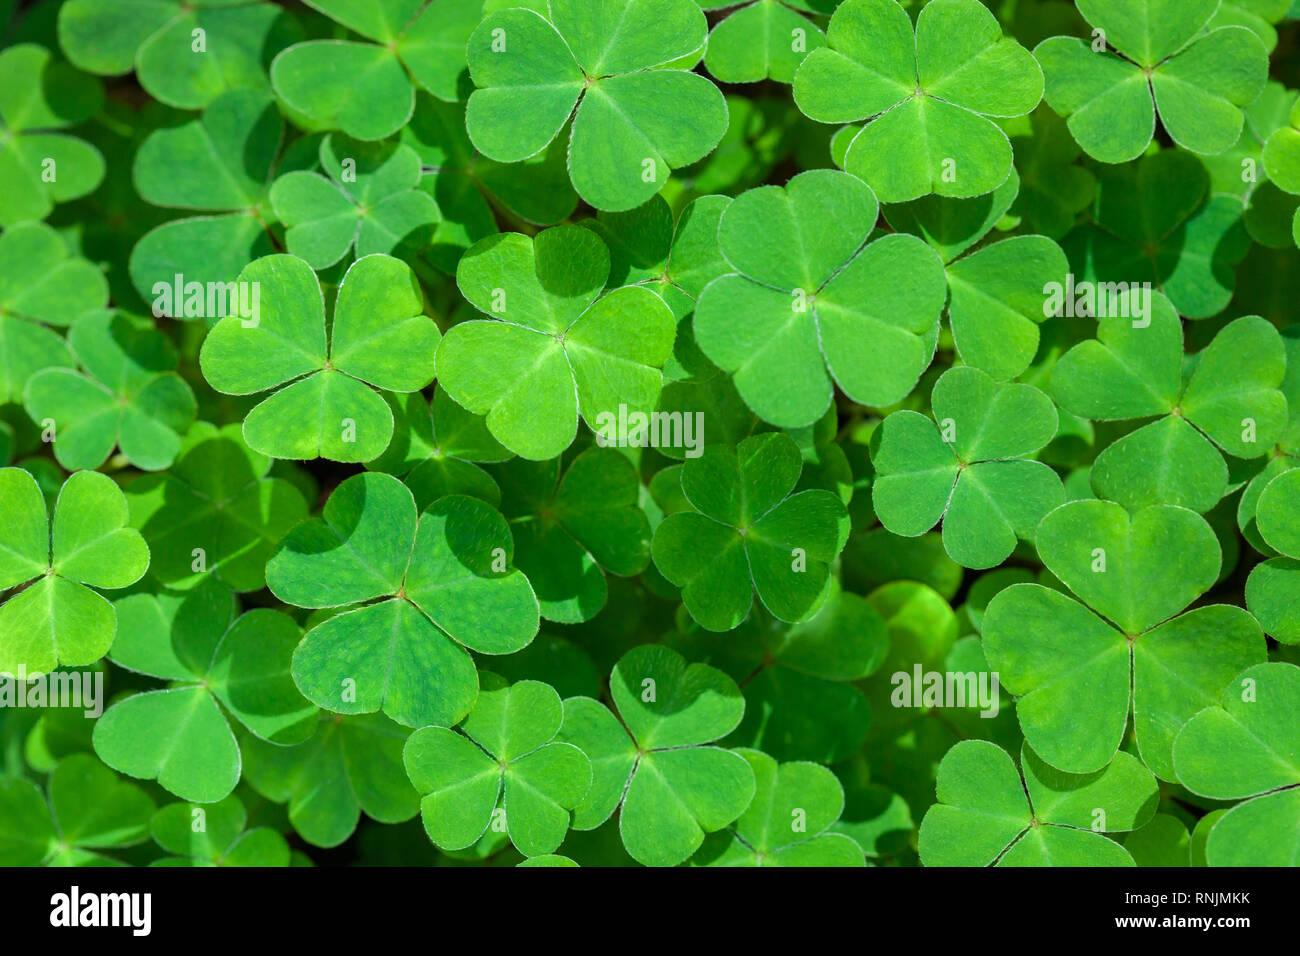 Natural green background with fresh three-leaved shamrocks.  St. Patrick's day holiday symbol.  Top View. Stock Photo